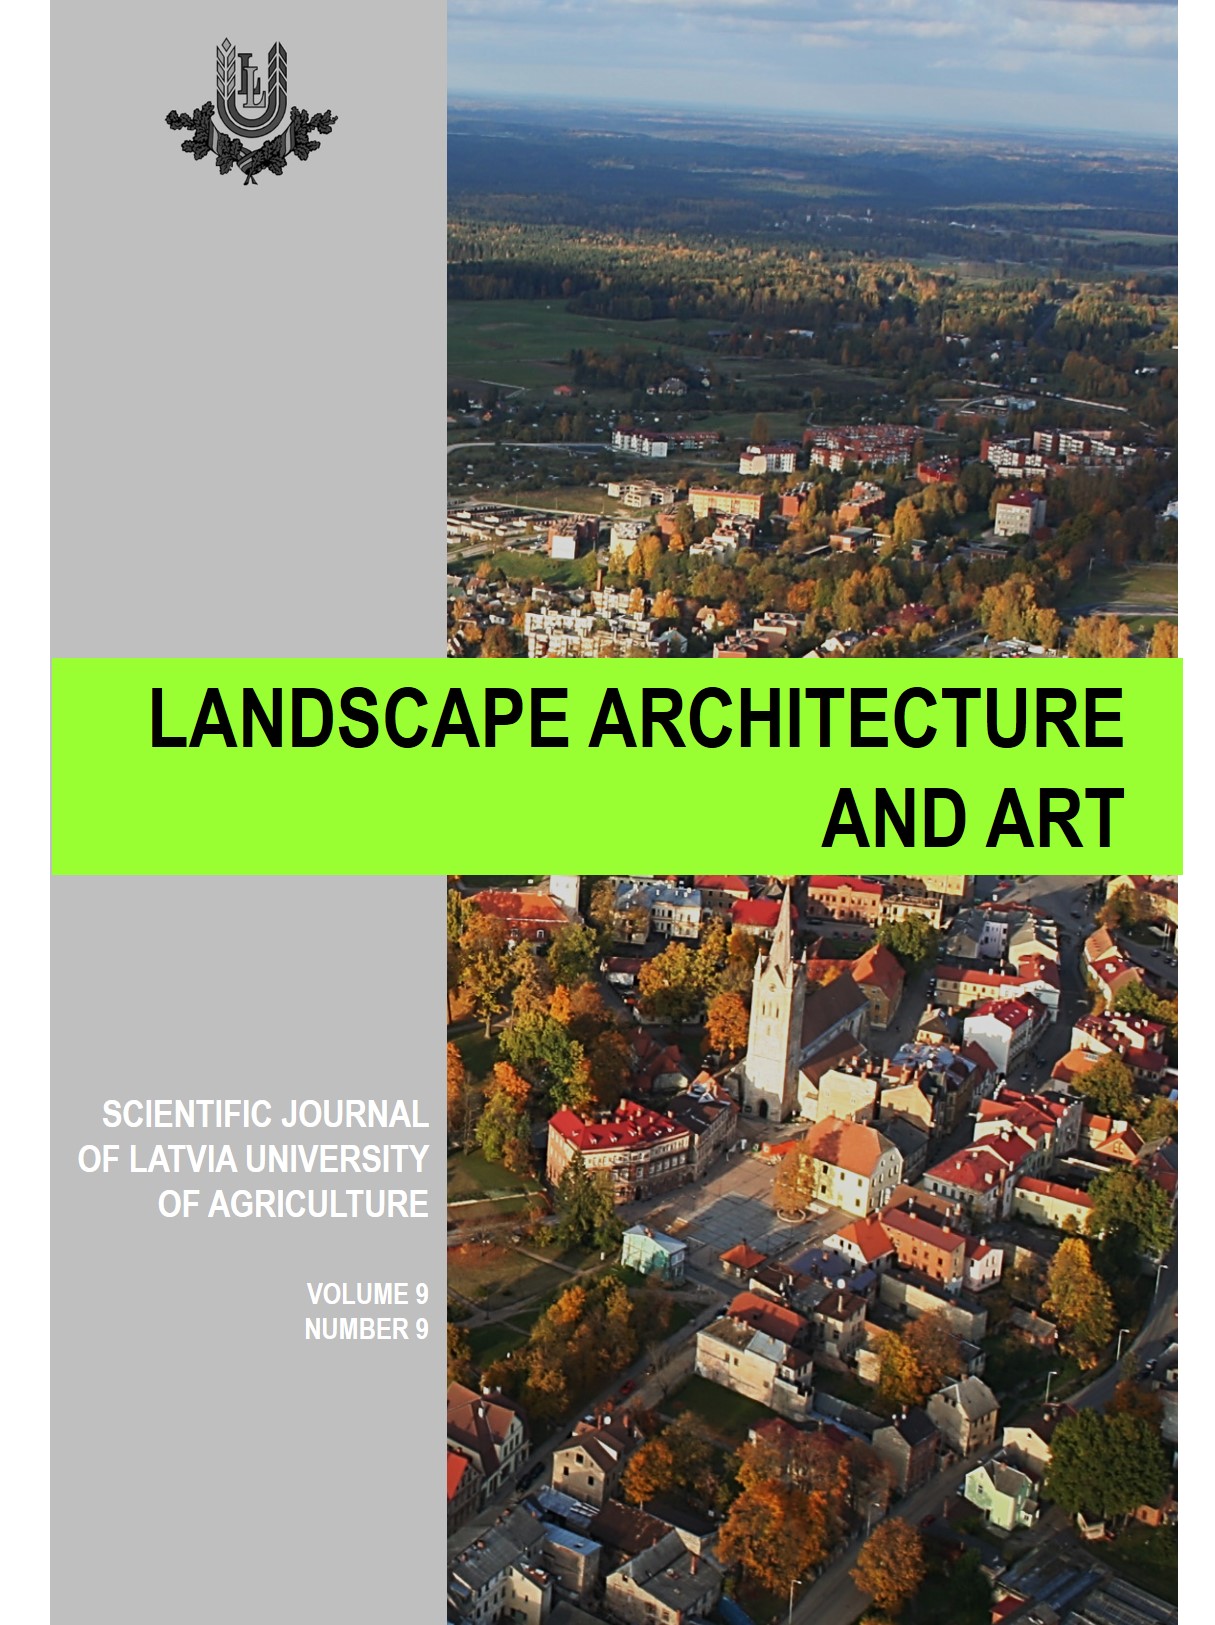 Landscape Architecture and Art, Volume 9, Number 9